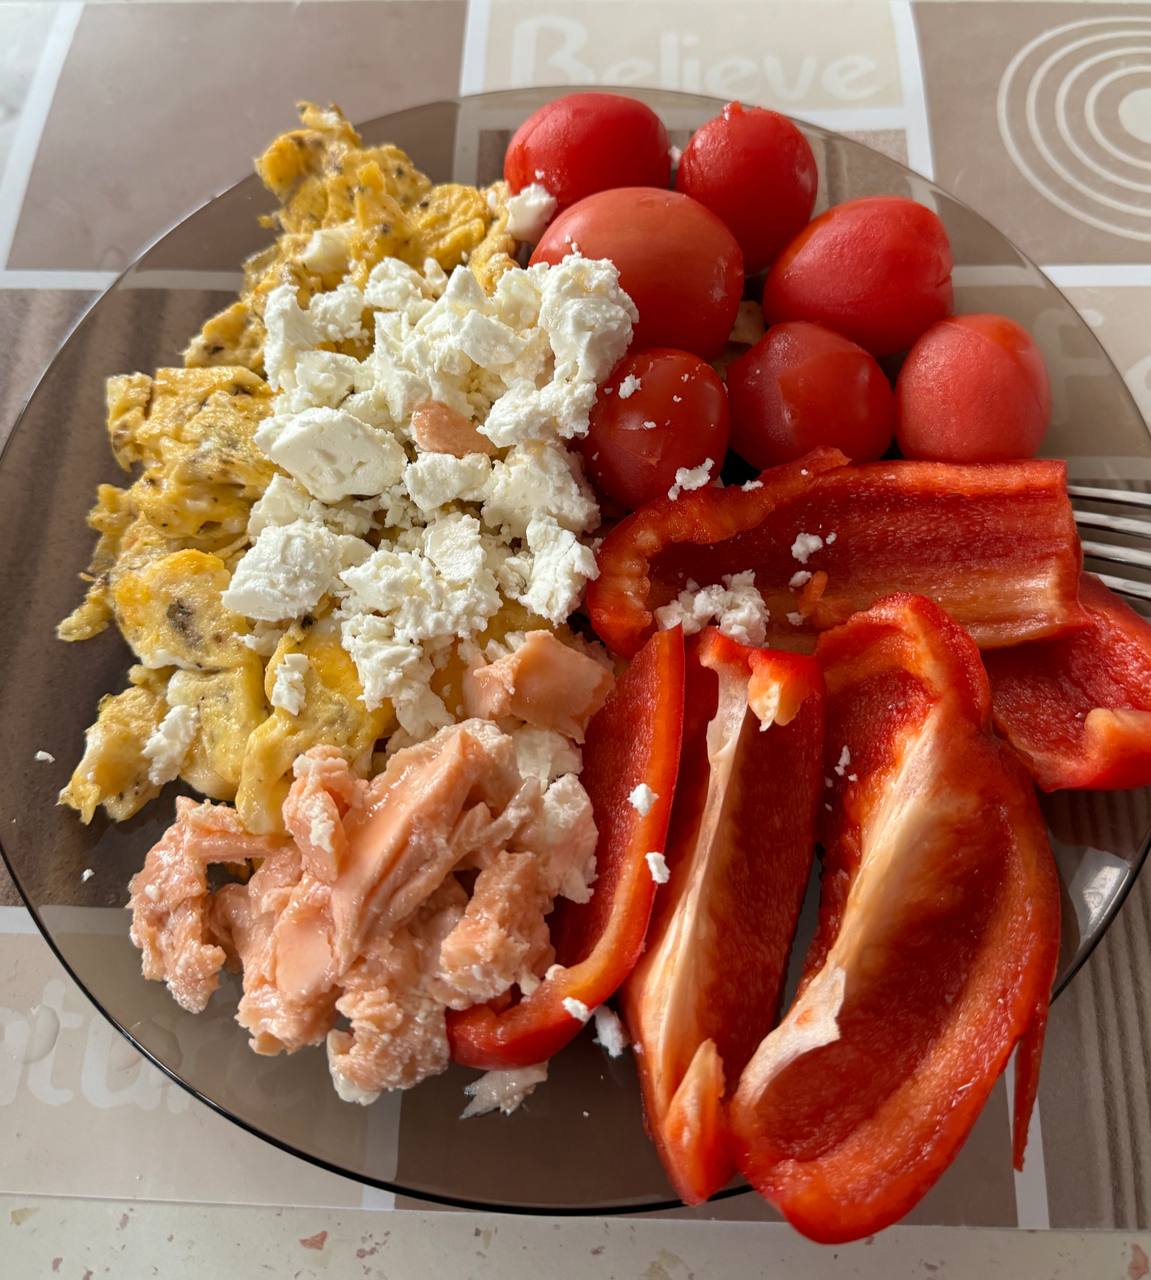 Balanced Meal With Scrambled Eggs, Smoked Salmon, Red Bell Pepper, Cherry Tomatoes, And Feta Cheese